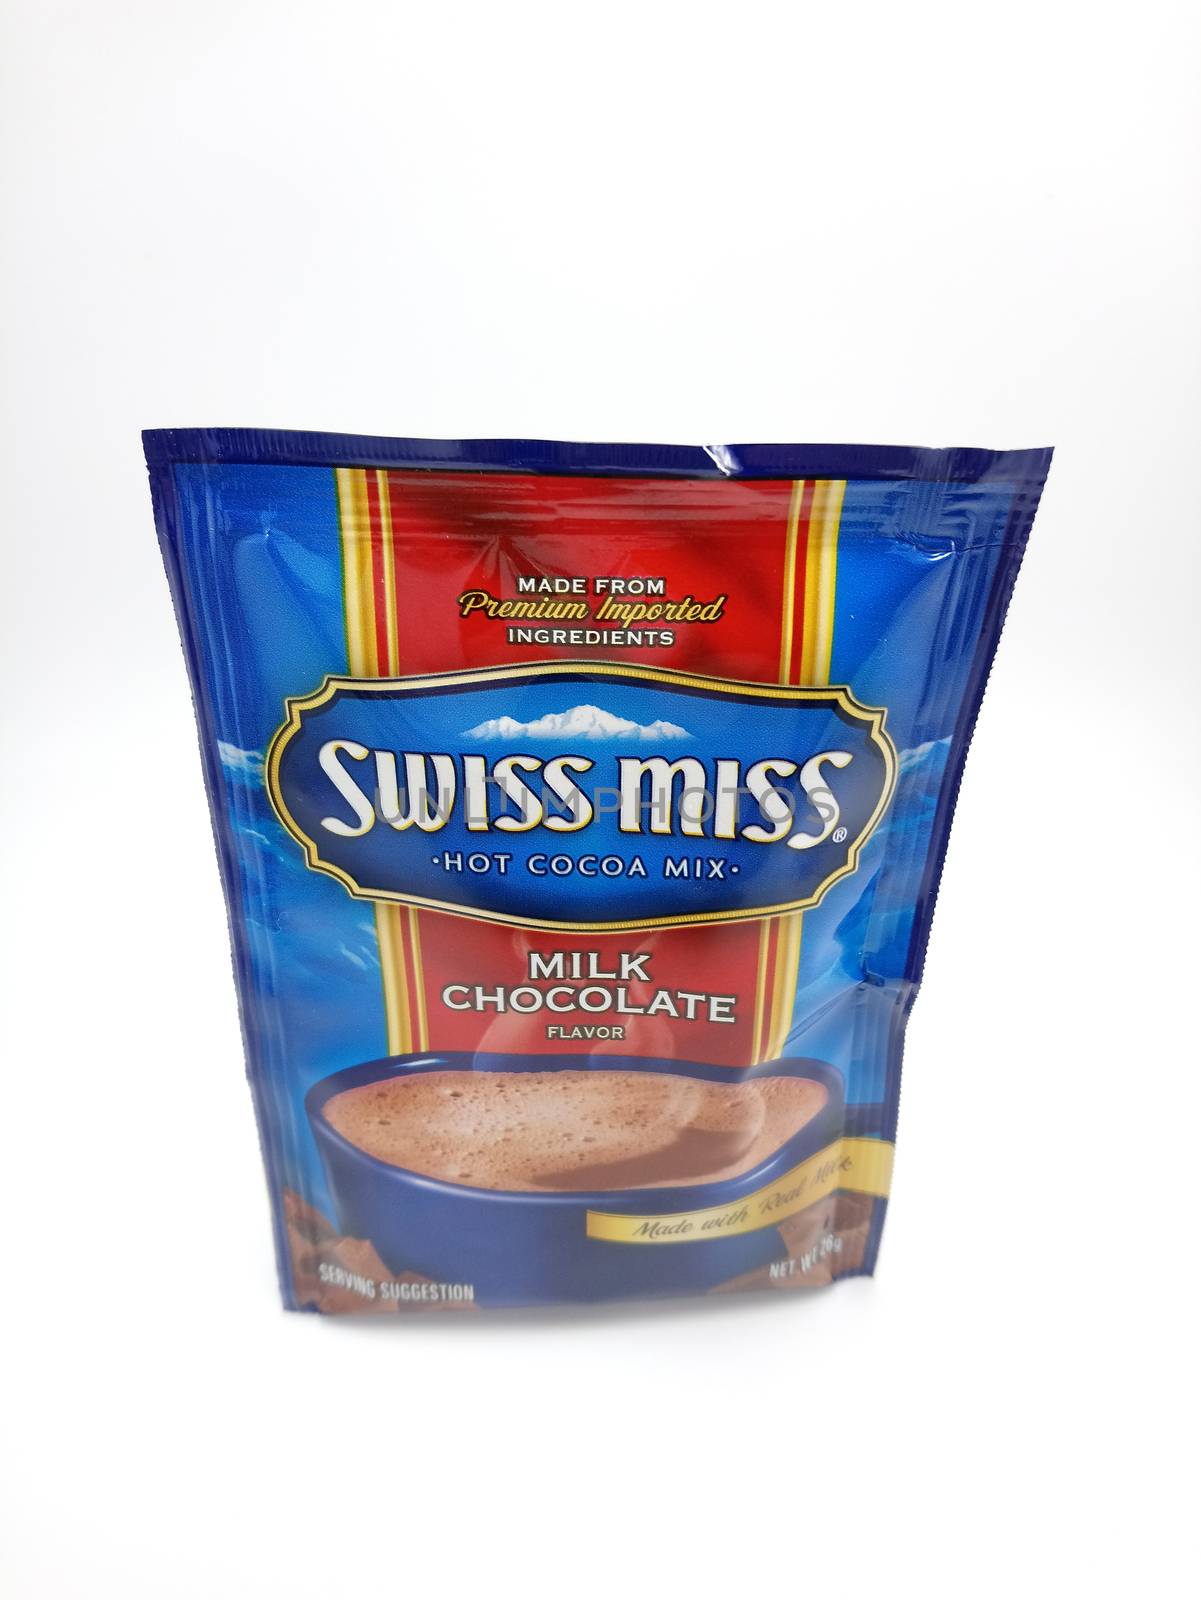 Swiss miss hot cocoa drink milk chocolate in Manila, Philippines by imwaltersy